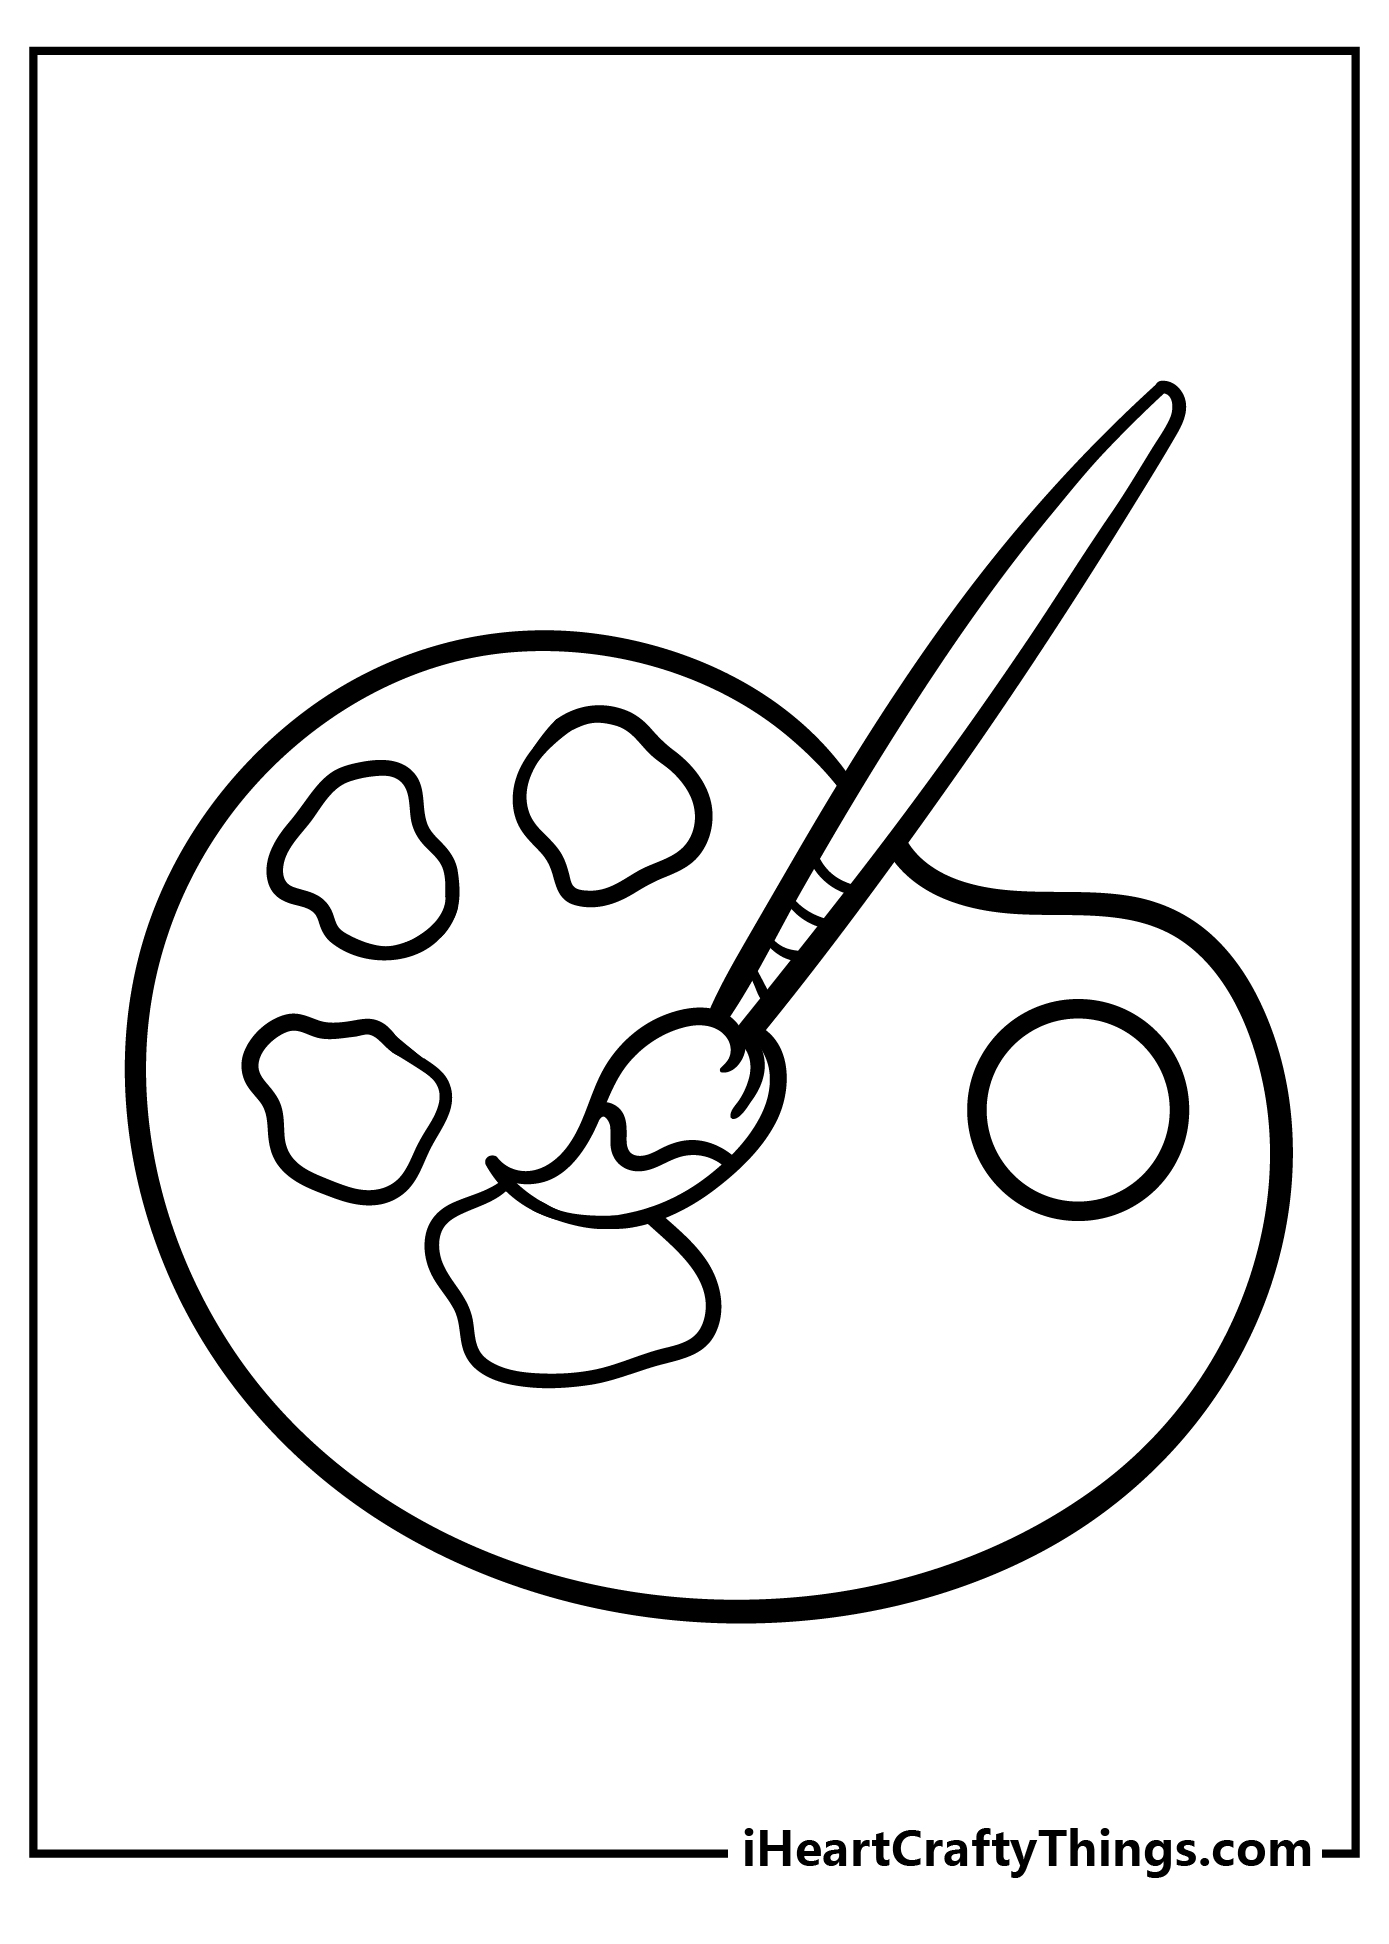 Painting Coloring Pages for adults free printable